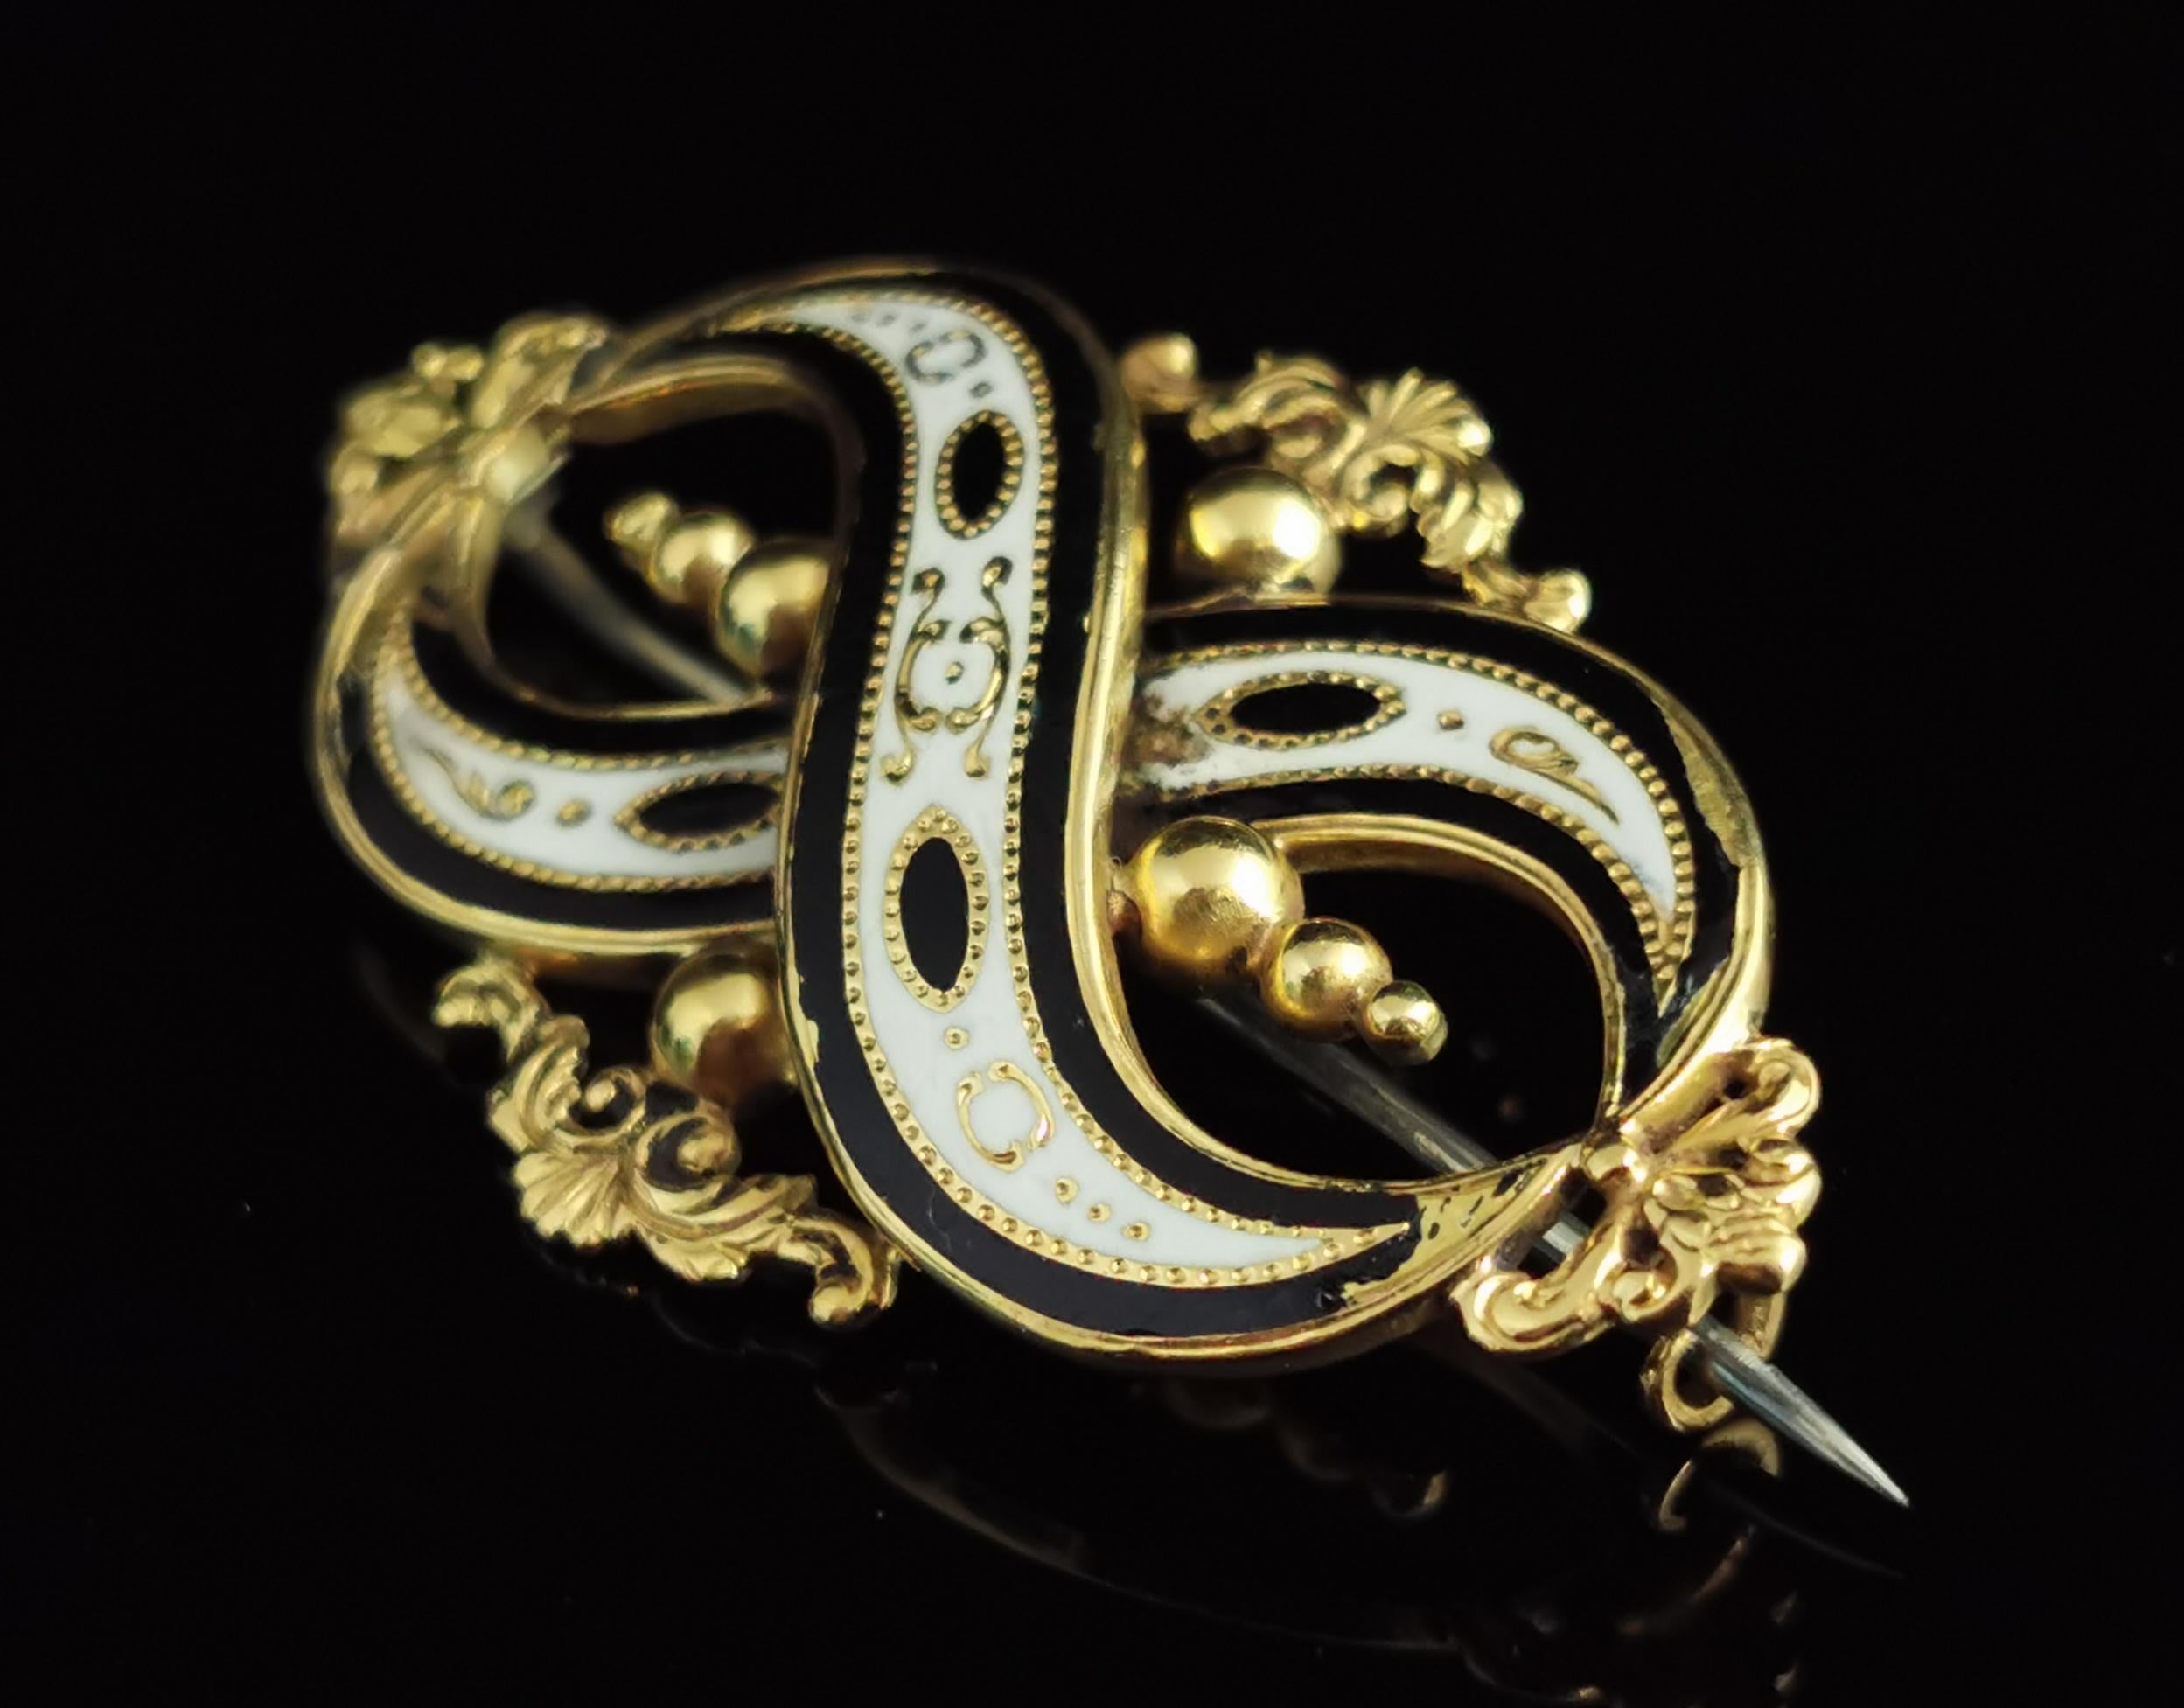 Women's Antique Victorian Mourning Brooch, 15 Karat Yellow Gold, Black and White Enamel